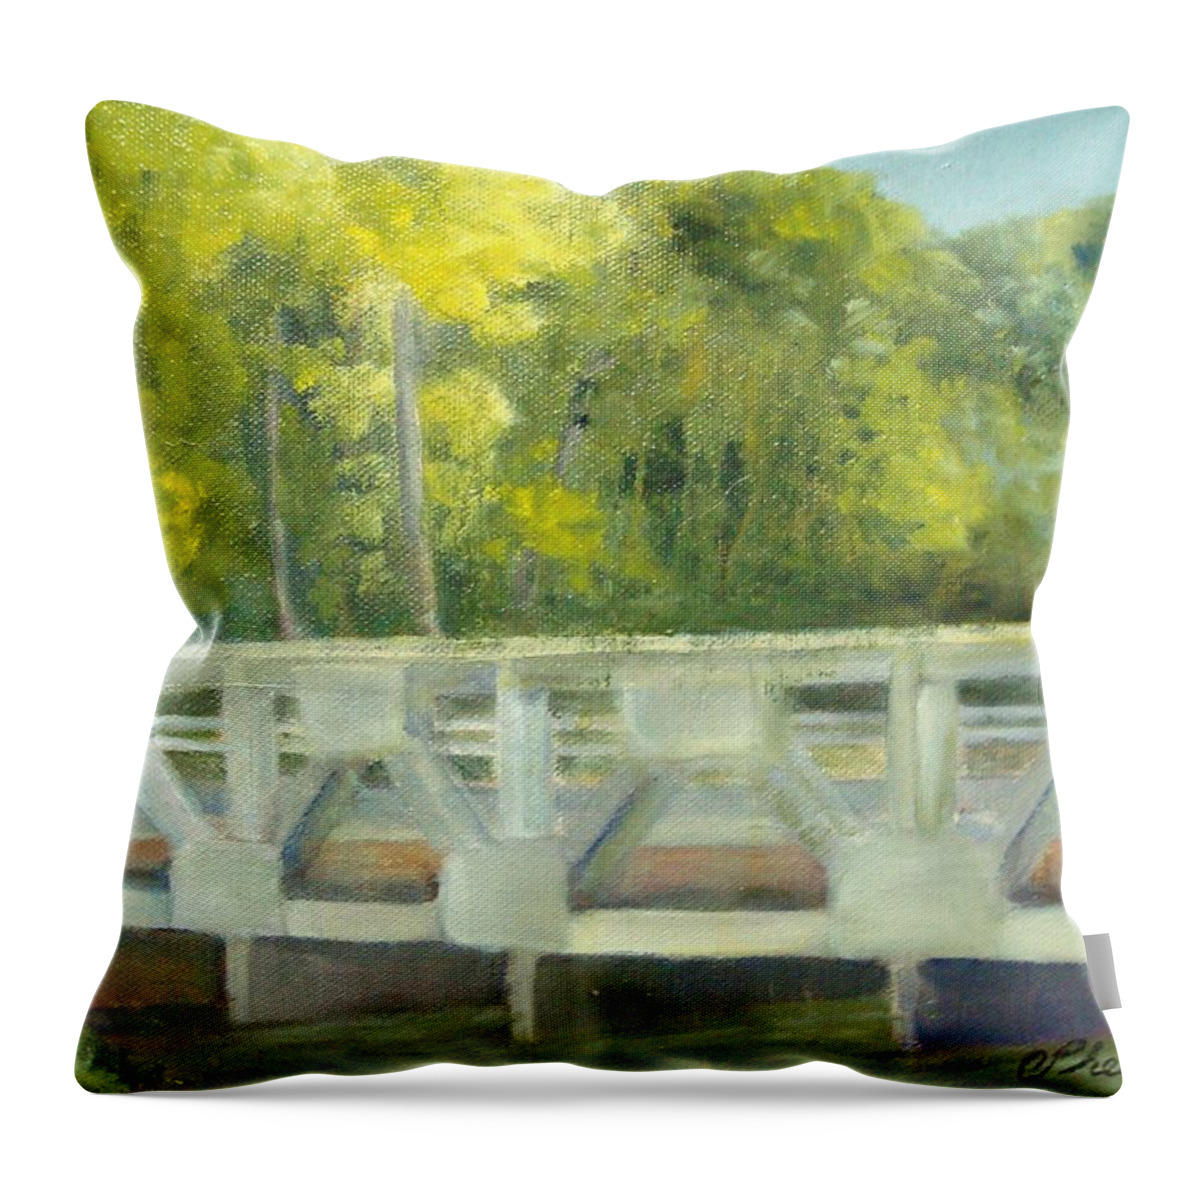 Smithville Park Throw Pillow featuring the painting Do You Paint Fish? by Sheila Mashaw